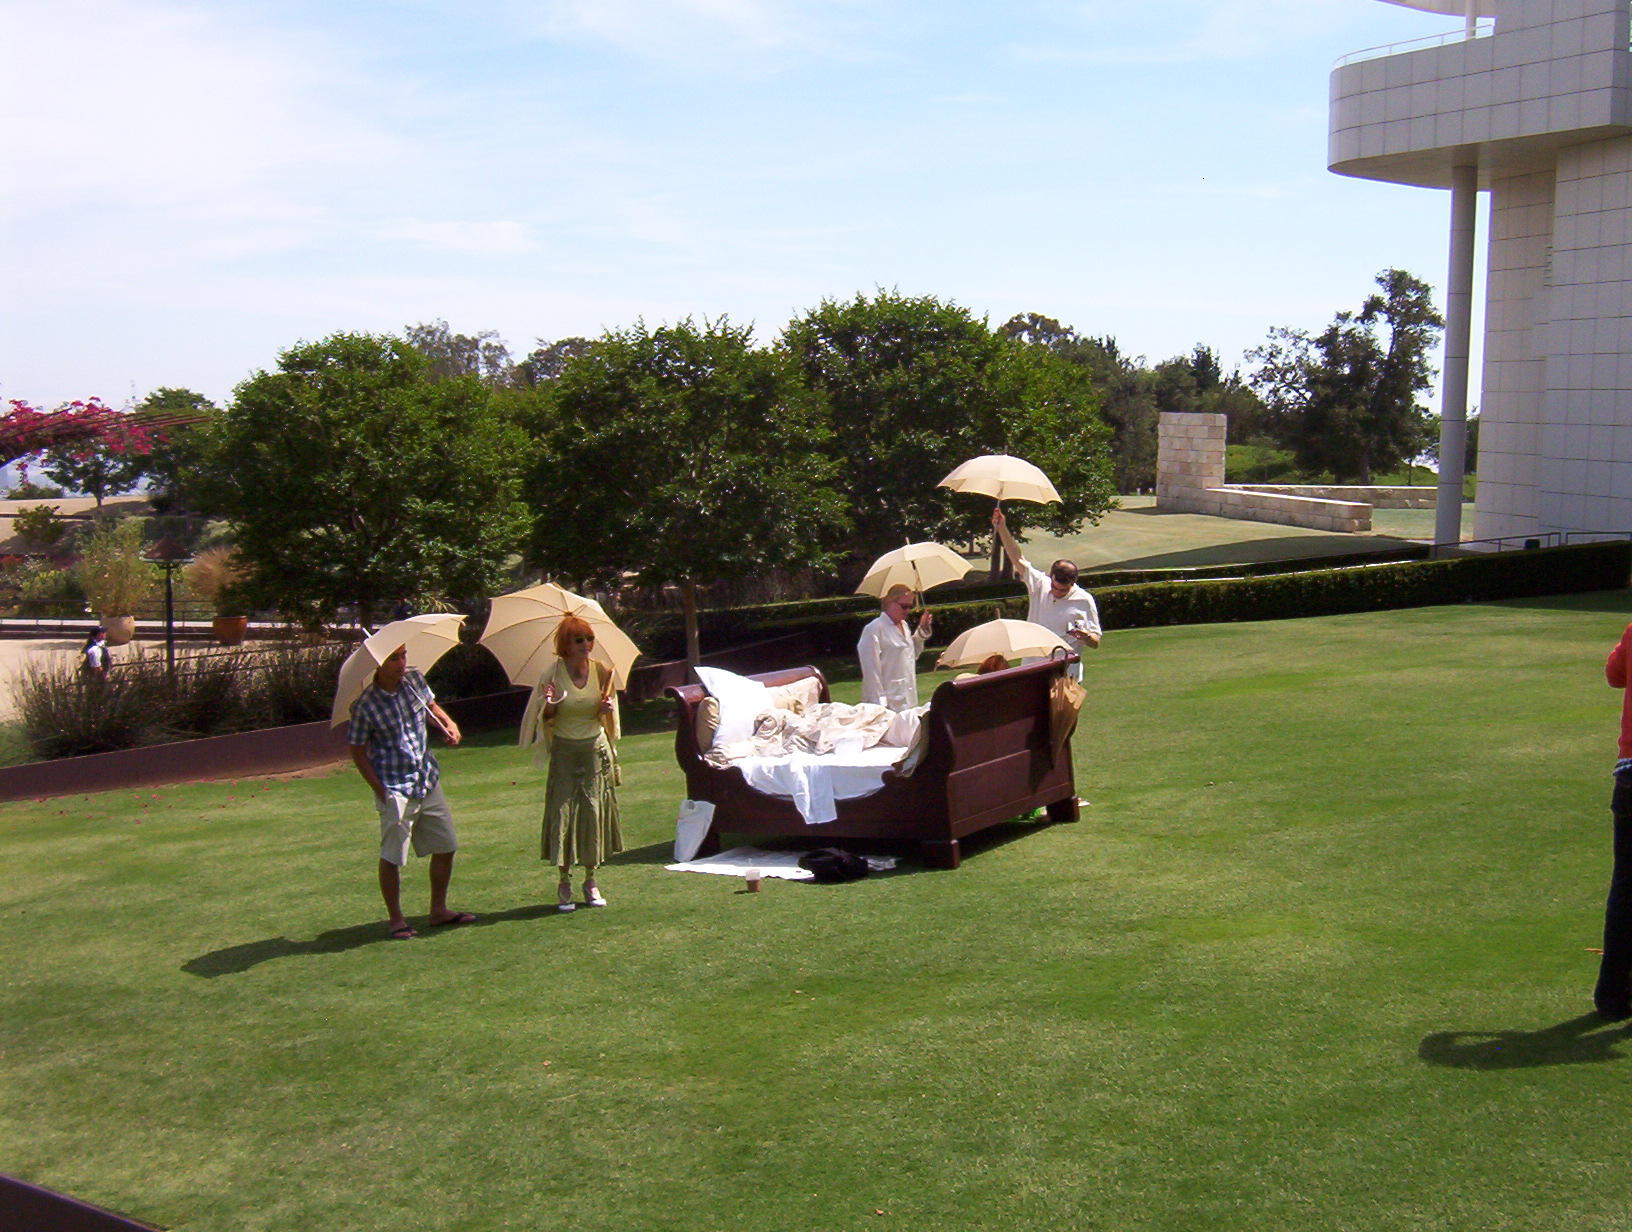 People carrying umbrellas walk around bed on lawn